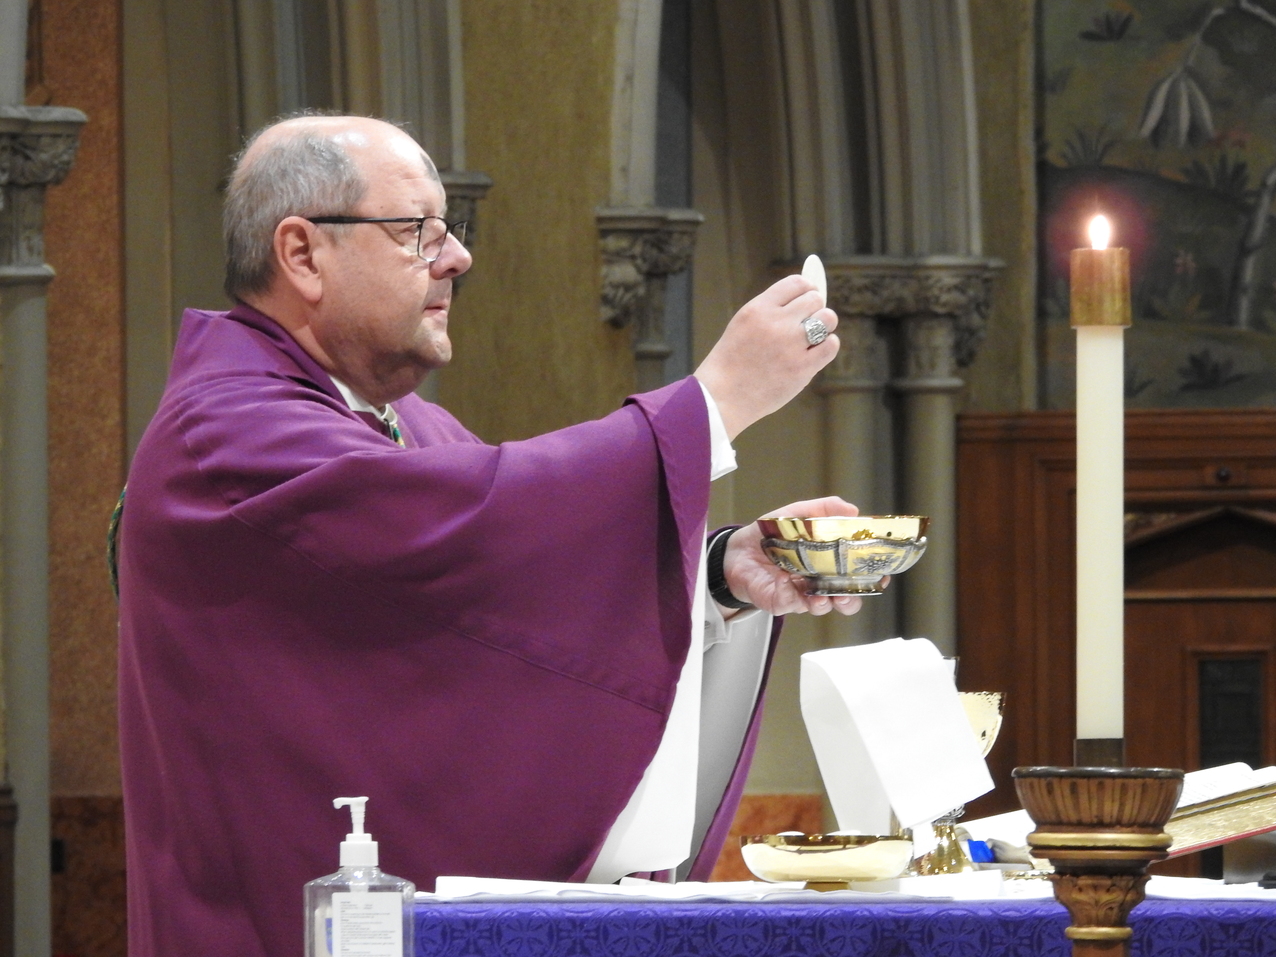 Bishop Malesic: Ashes symbolize our human limitations, mortality and sins